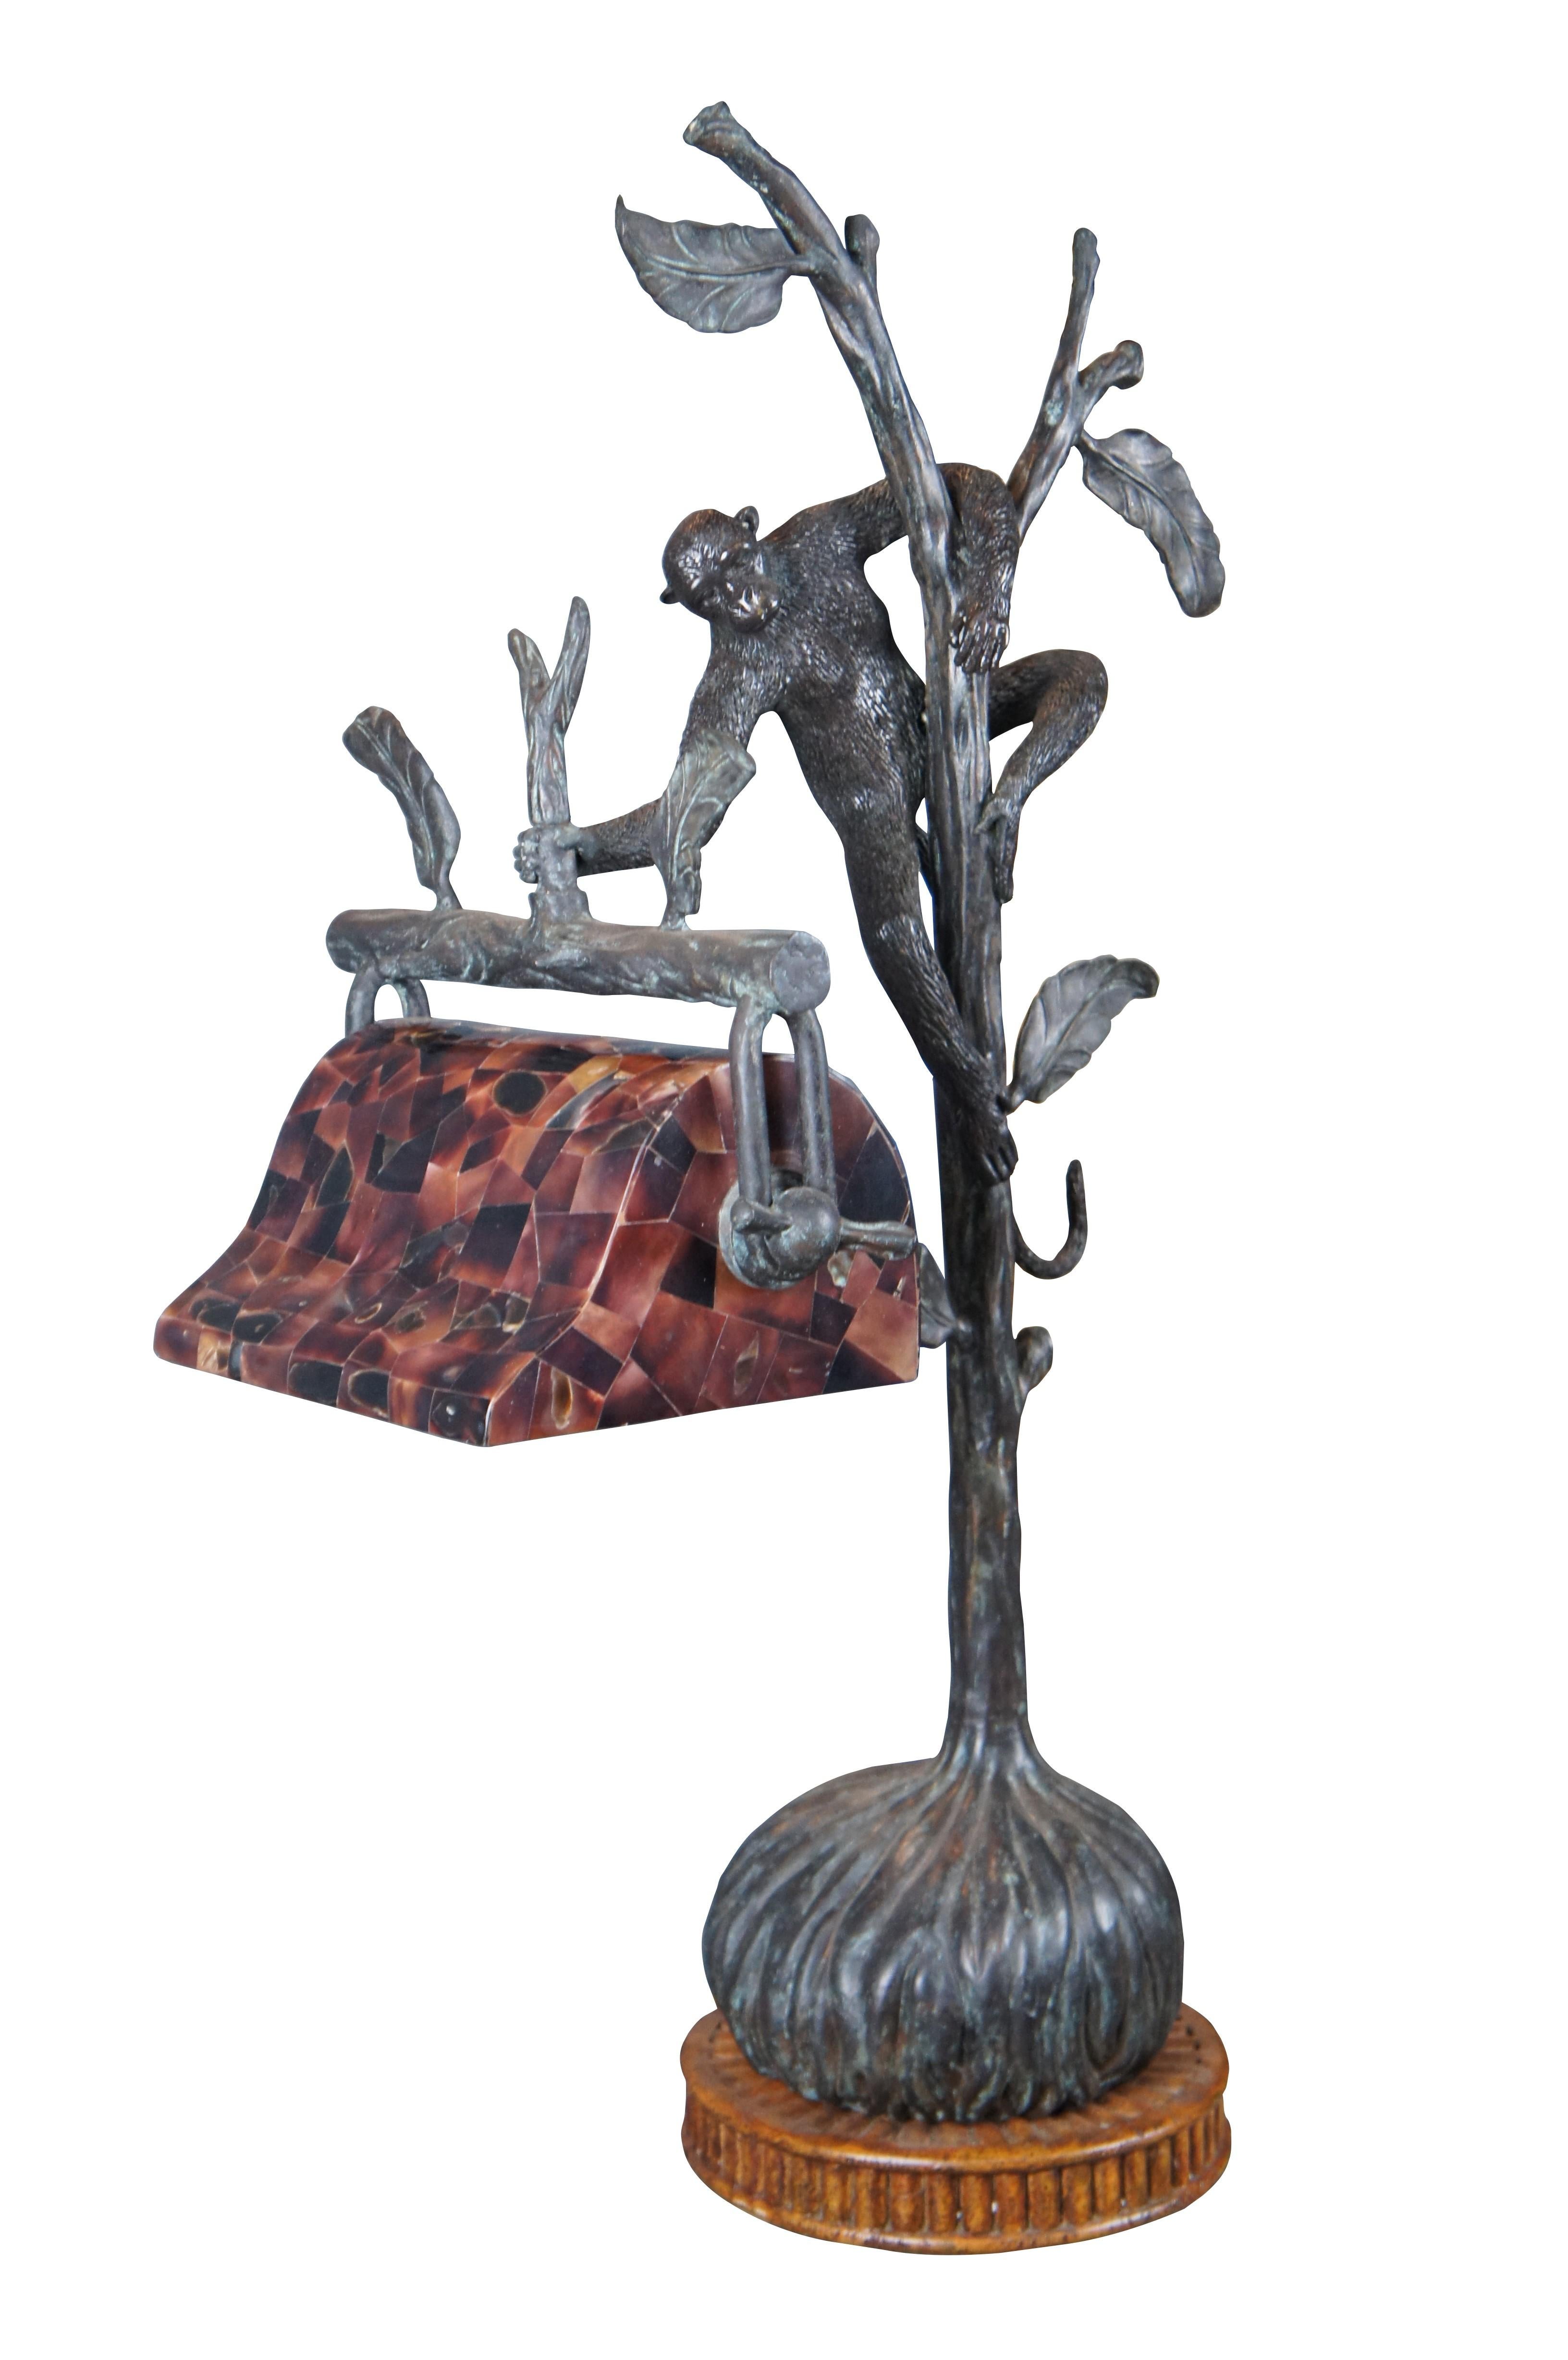 An impressive handmade figural bronze lamp by Maitland Smith. Features a monkey climbing a tree branch, holding an adjustable banker style pen shell shade. The bronze is mounted to a round wooden fluted base. Marked along underside.

Dimensions:
27